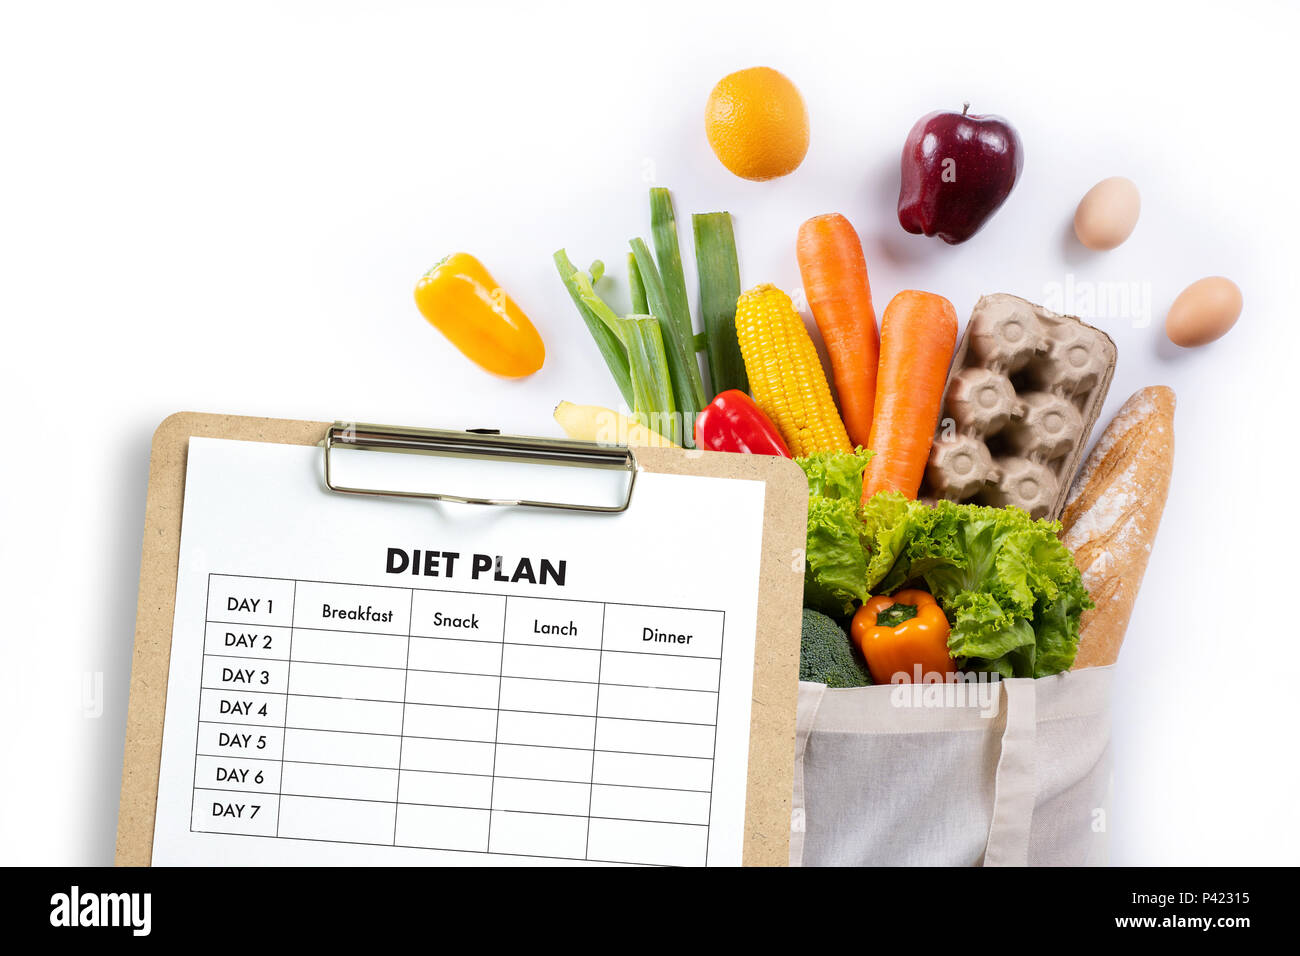 DIET PLAN healthy eating, dieting, slimming and weigh loss concept Stock Photo